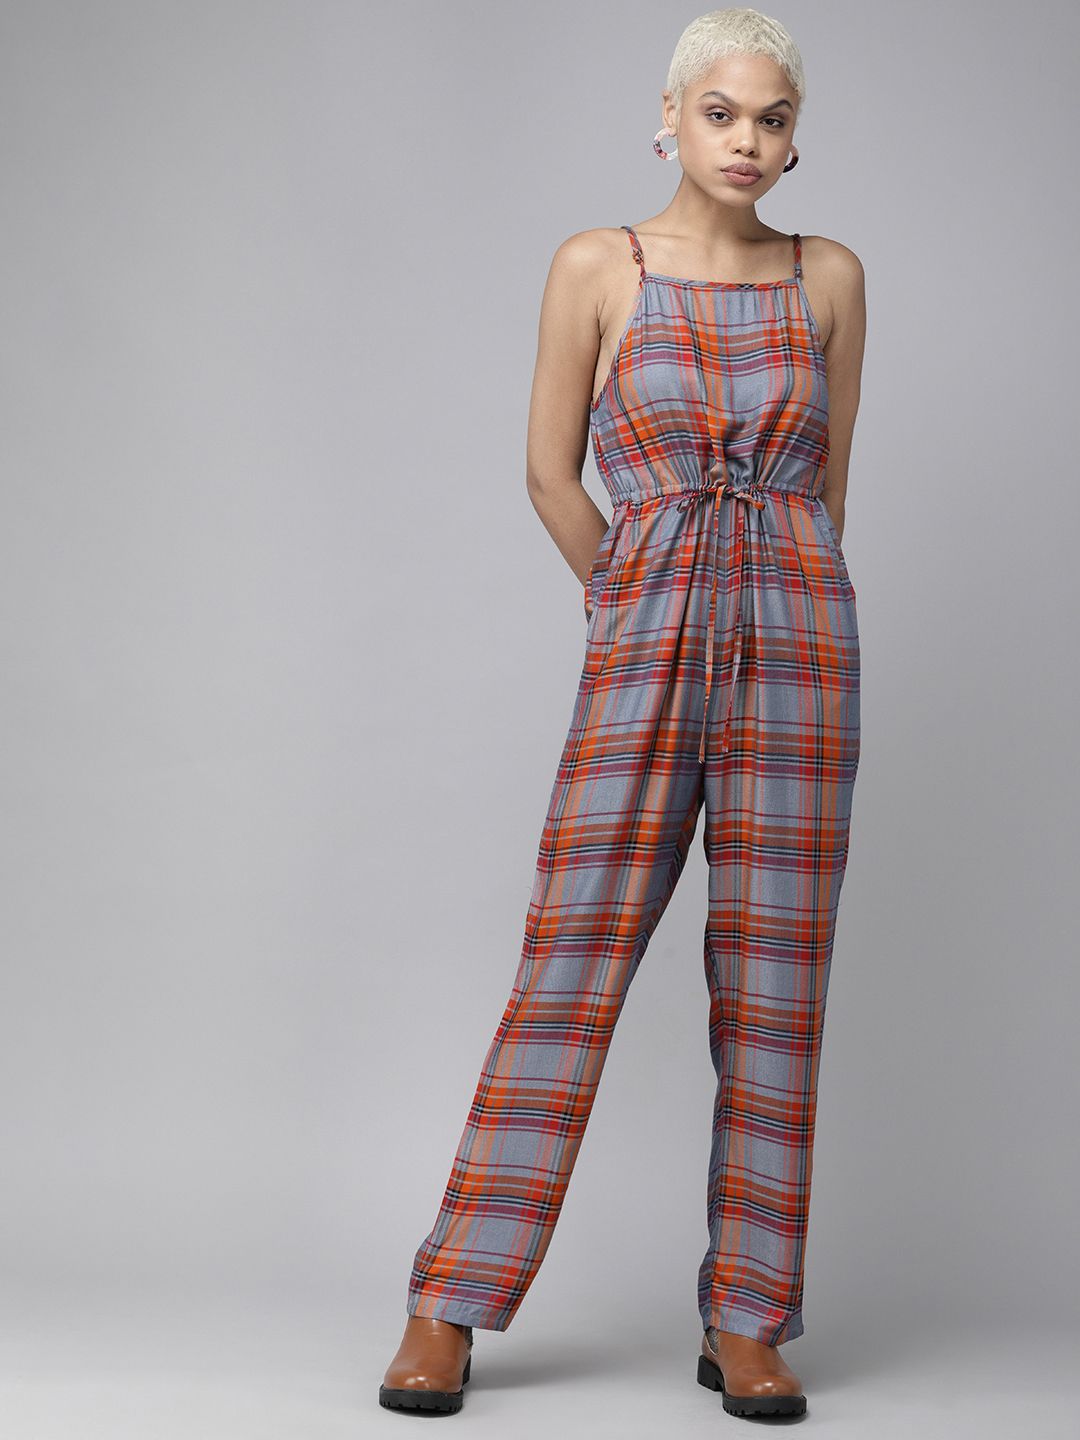 Roadster Red & Grey Checked Shoulder Strap Basic Jumpsuit With Waist Tie up Price in India